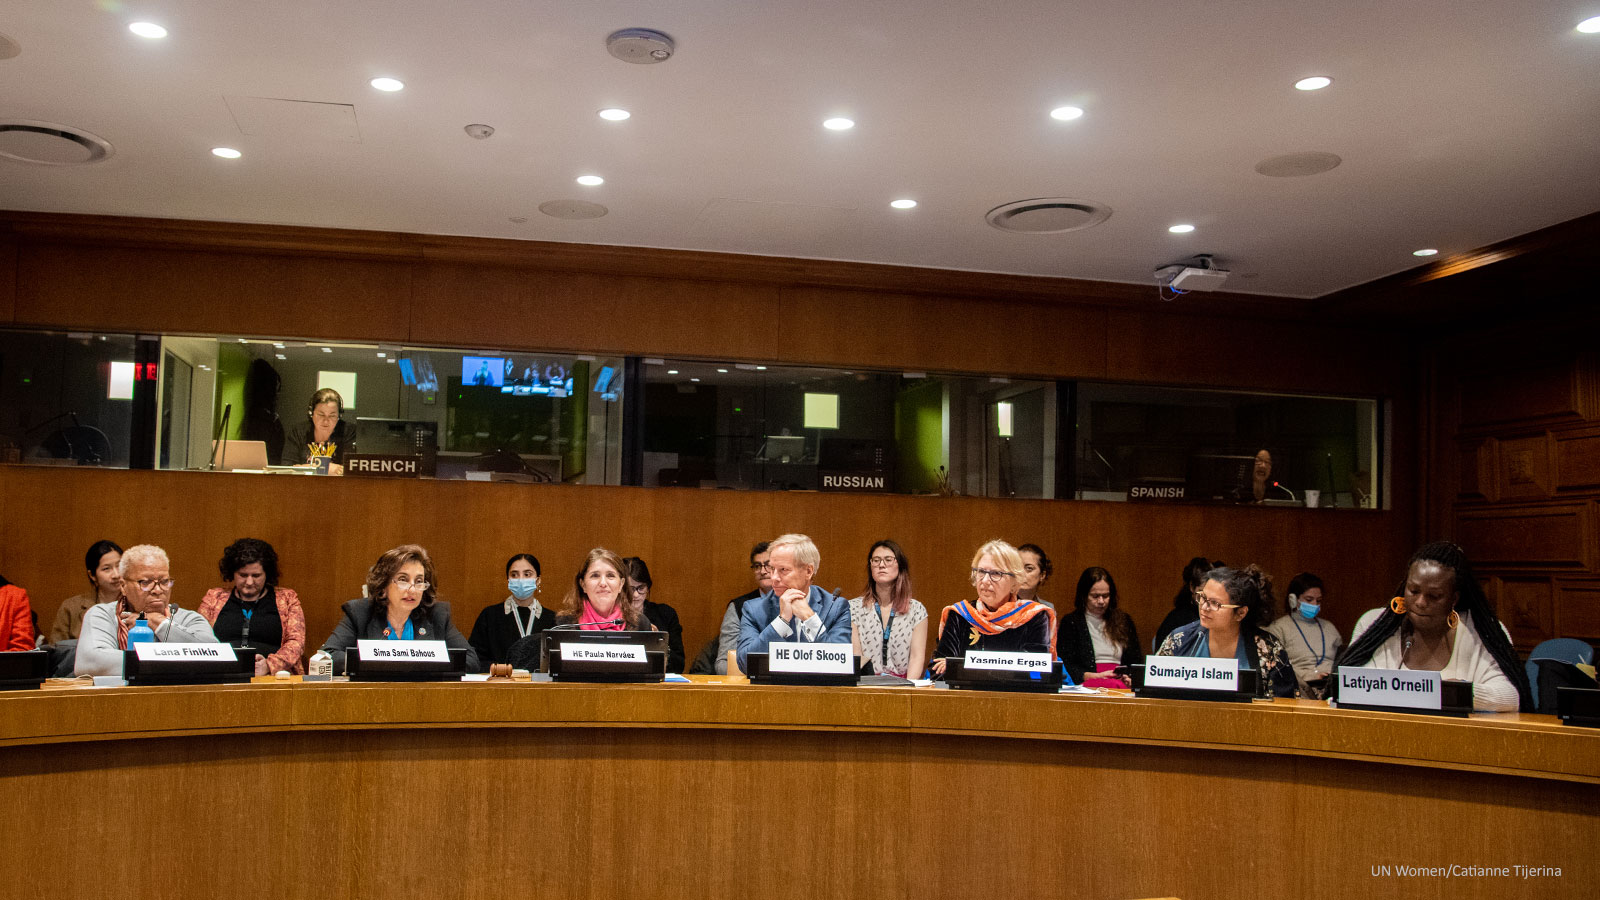 UN Women, in partnership with the Generation Equality Action Coalitions on Feminist Movements and Leadership and Gender-Based Violence (GBV), convened a high-level side event on solutions for strengthening civic space and women’s digital rights. Photo: UN Women/Catianne Tijerina